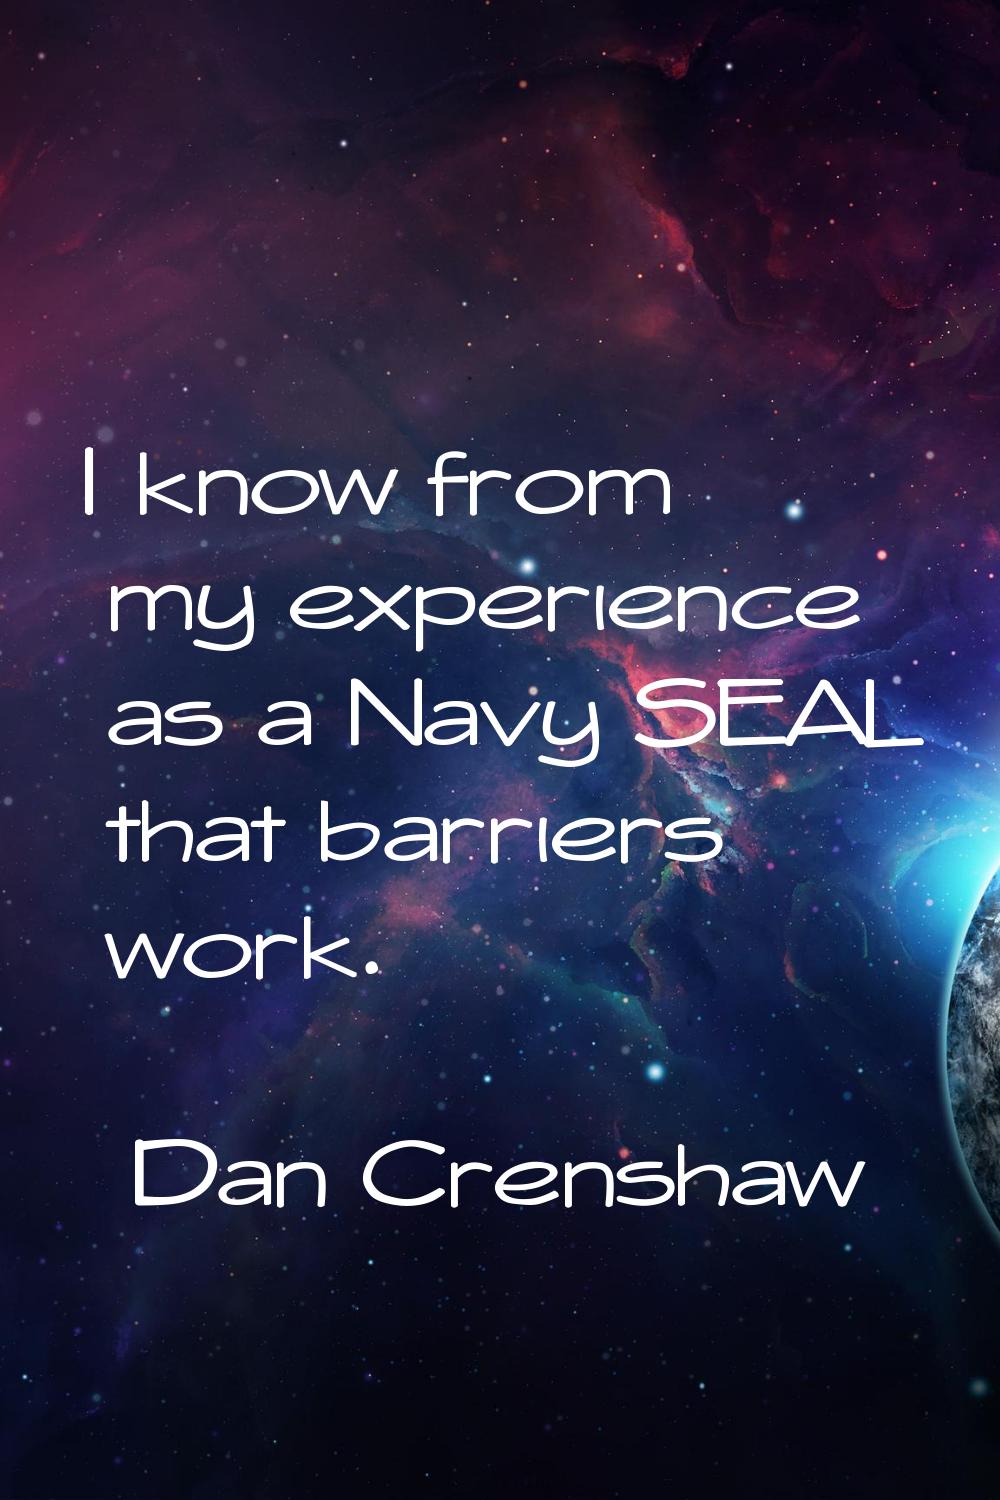 I know from my experience as a Navy SEAL that barriers work.